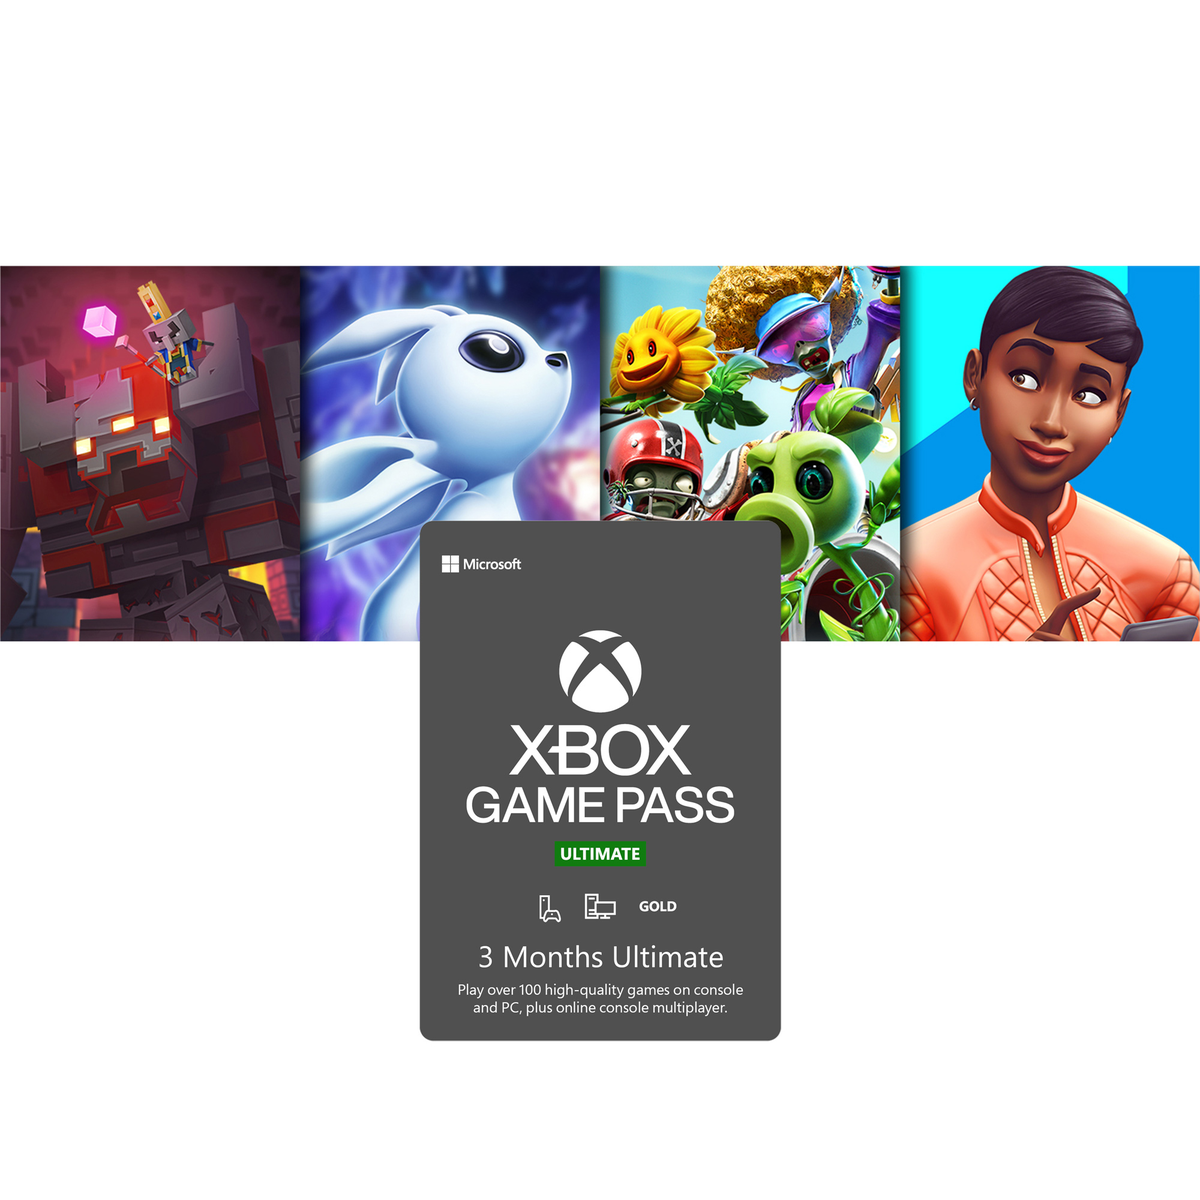 Buy Xbox Game Pass Ultimate online